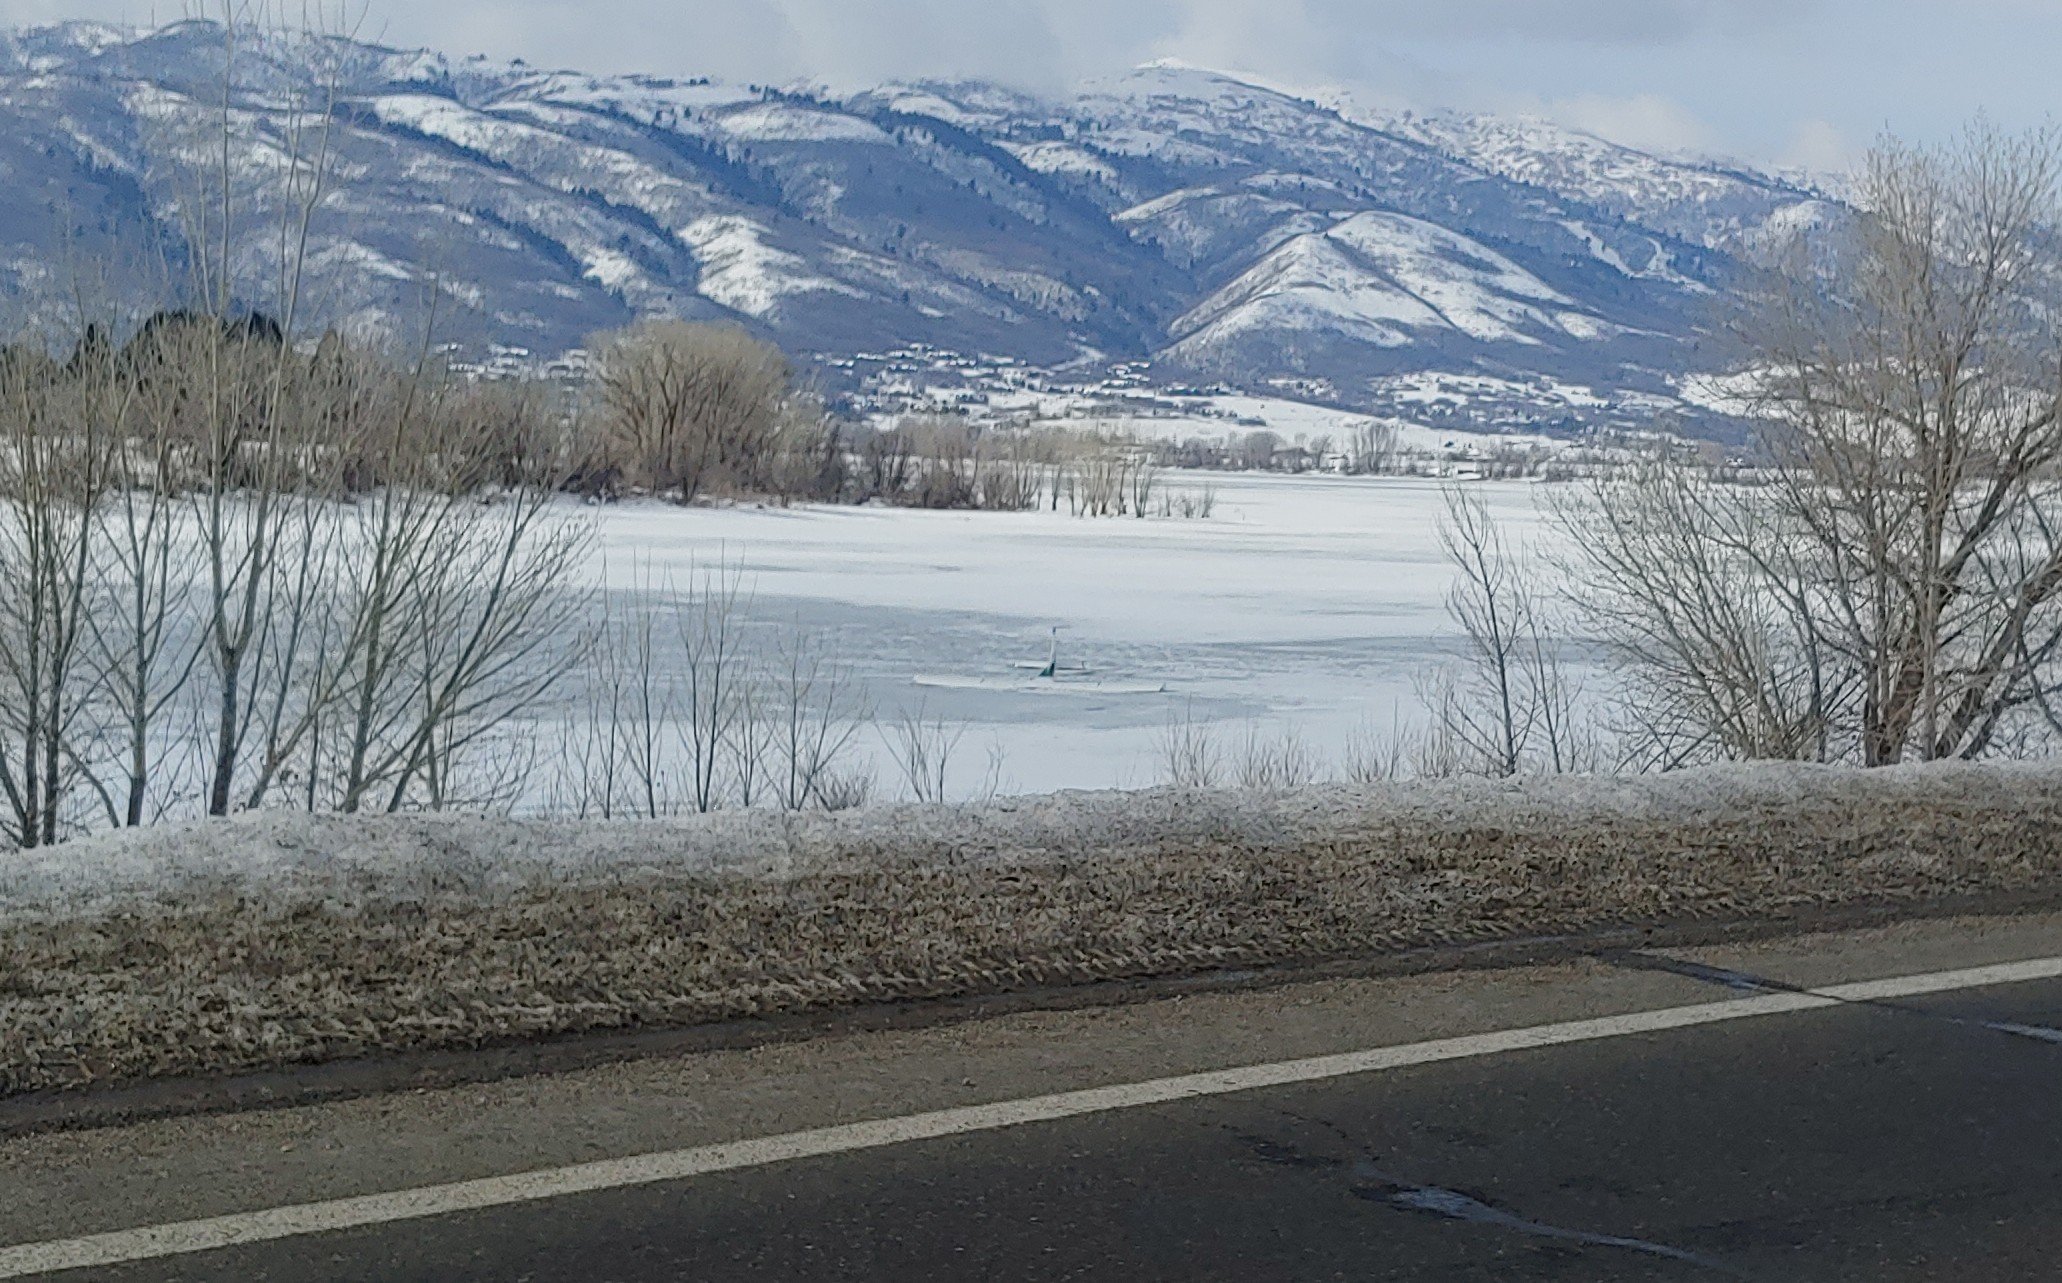 A small Cessna airplane crashed into an icy Pineview Reservoir....